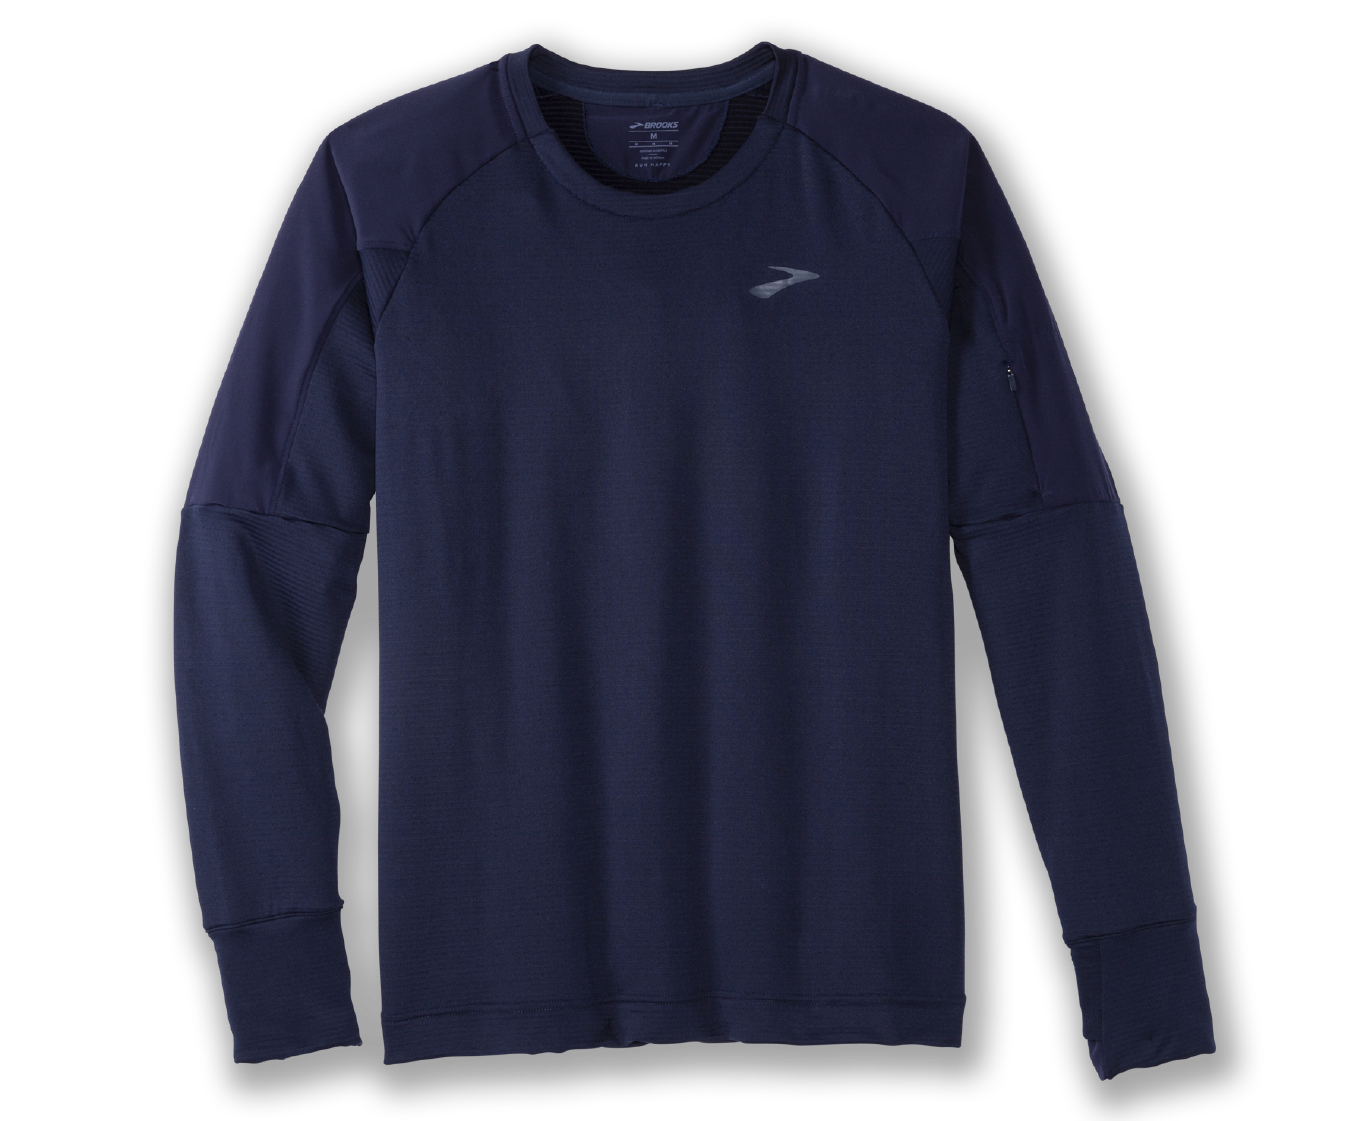 Notch Thermal Long Sleeves